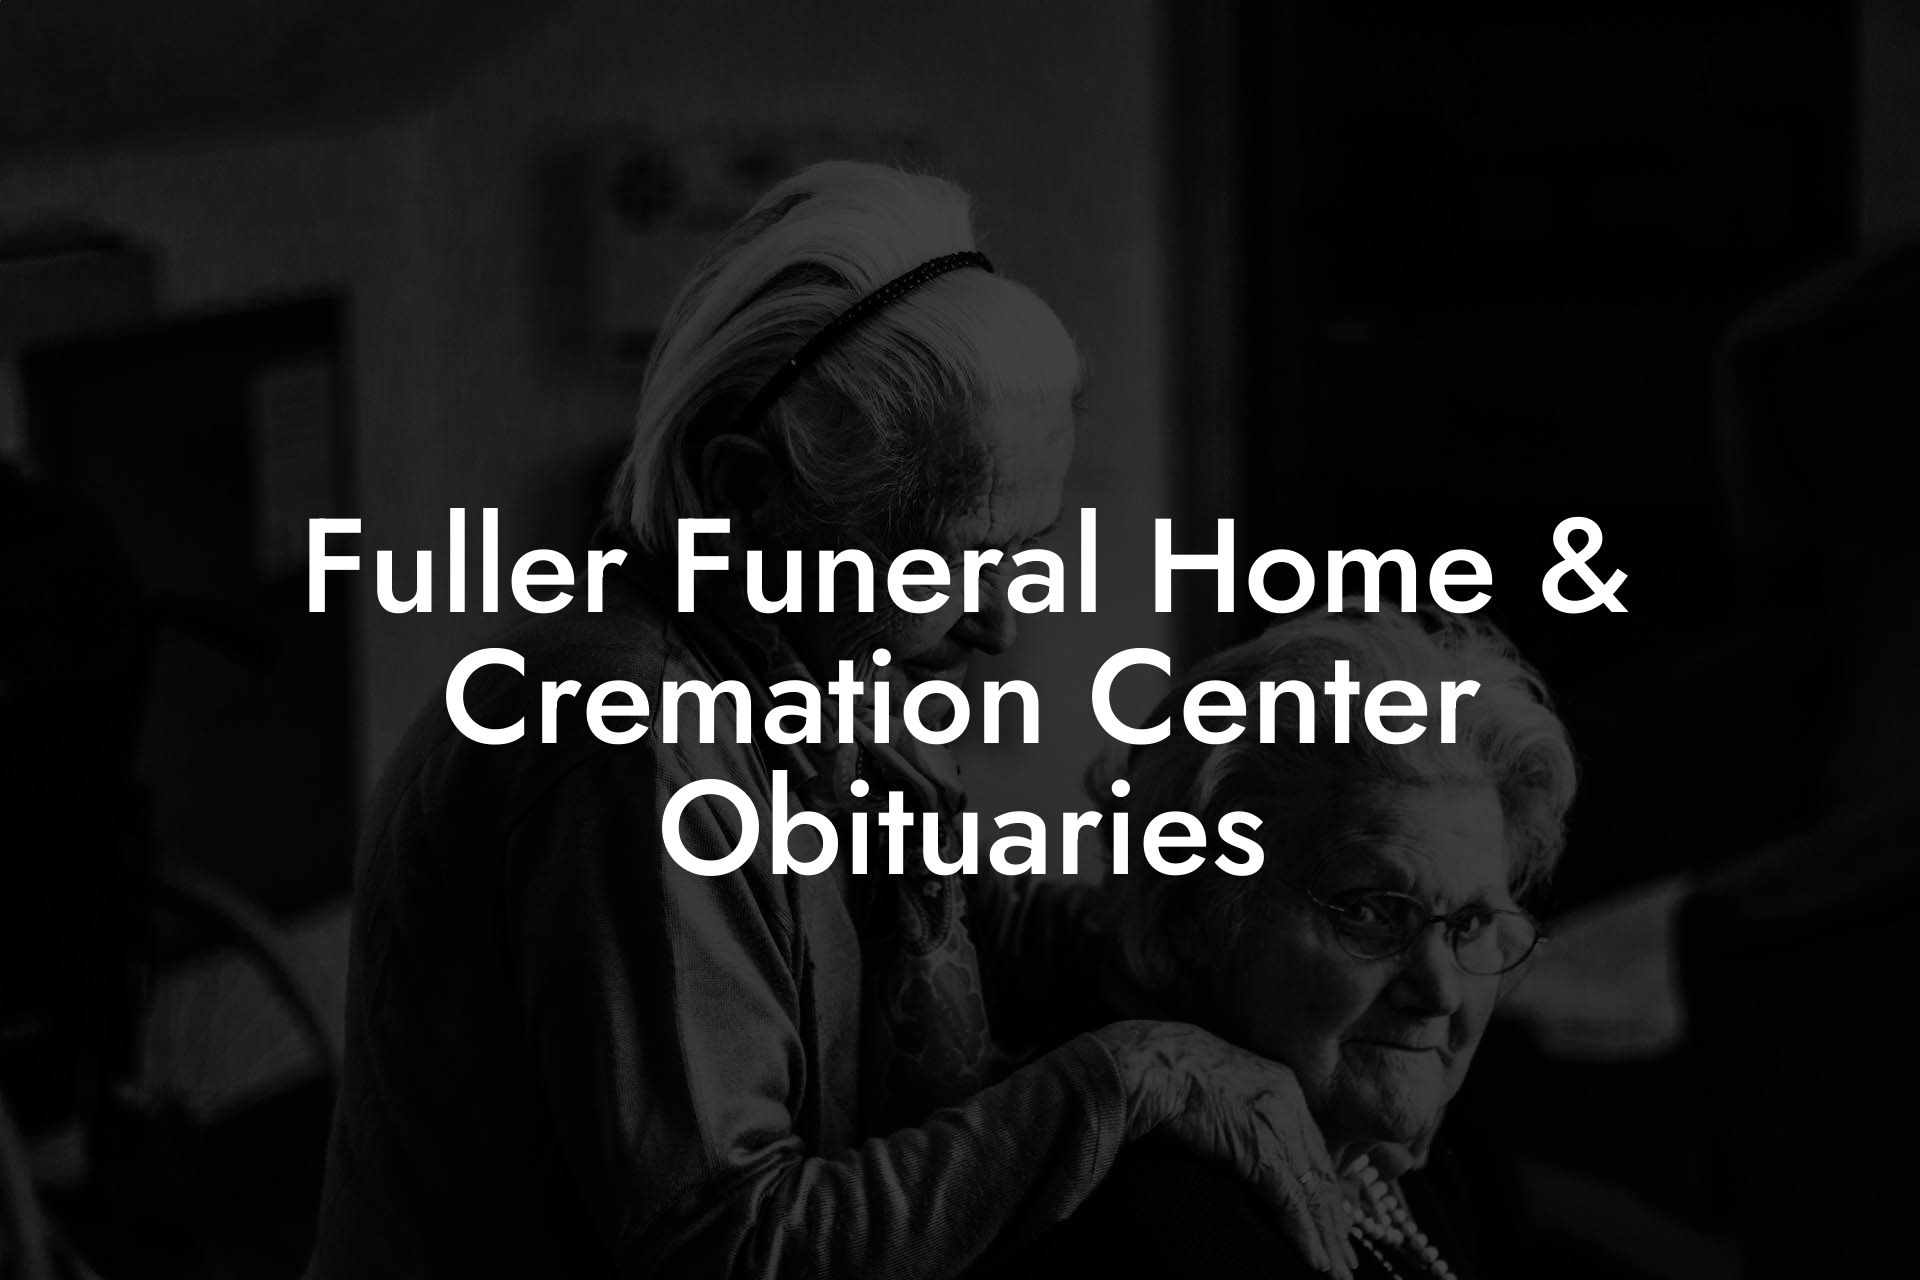 Fuller Funeral Home & Cremation Center Obituaries